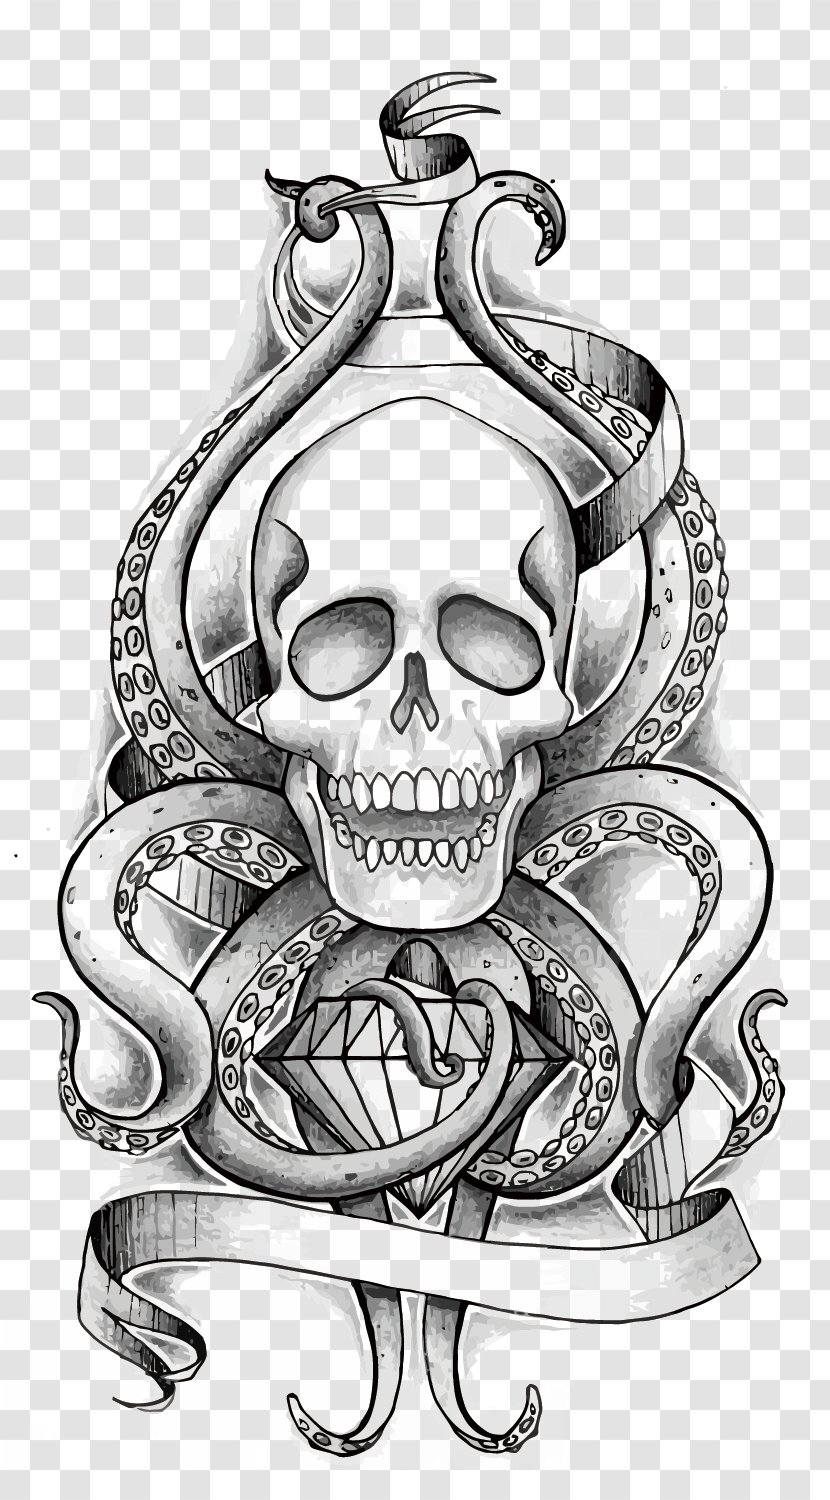 How To Draw An Octopus Skull Tattoo Step by Step Drawing Guide by Dawn   DragoArt